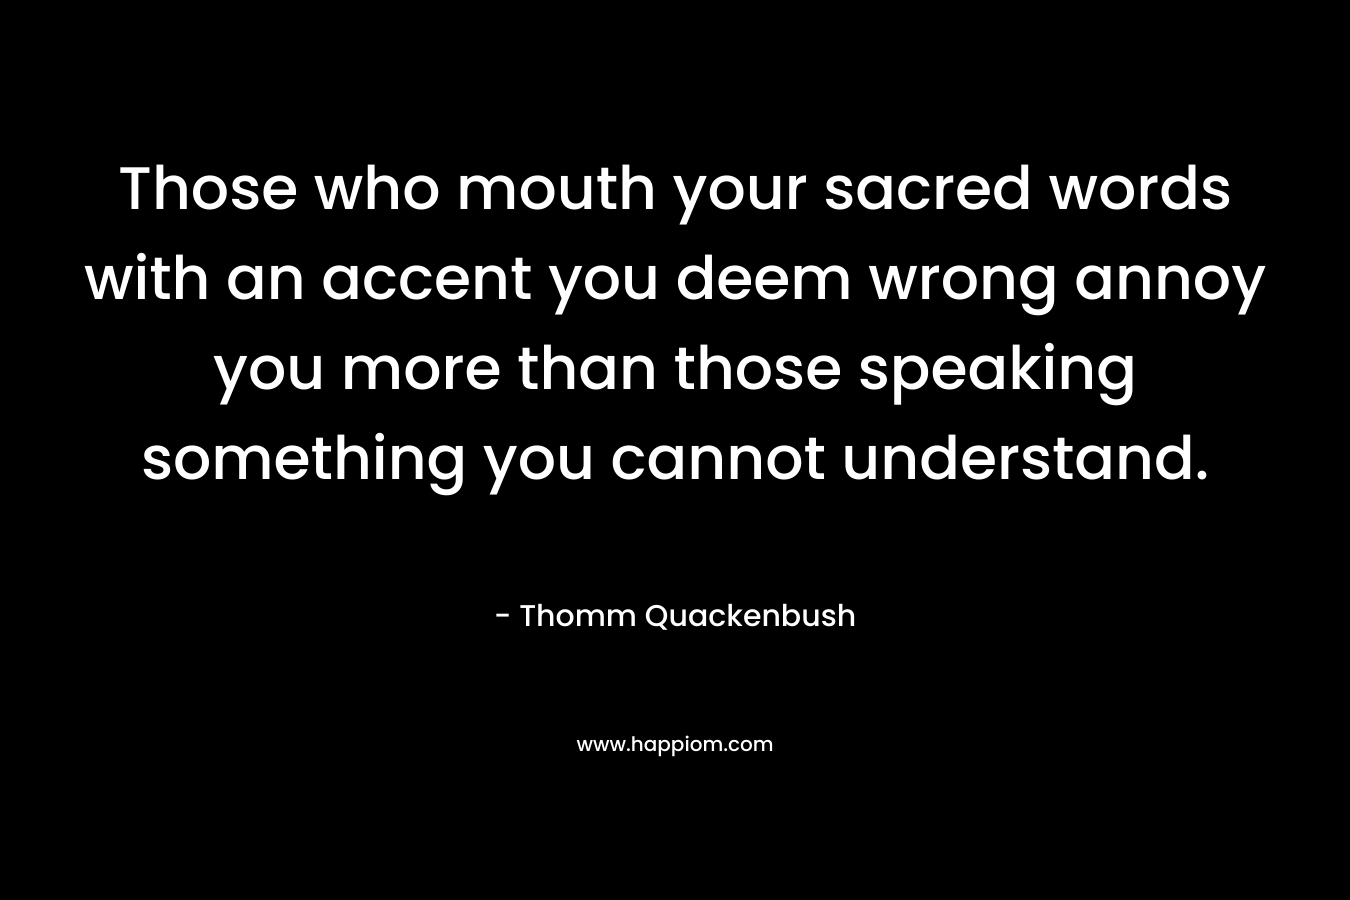 Those who mouth your sacred words with an accent you deem wrong annoy you more than those speaking something you cannot understand. – Thomm Quackenbush